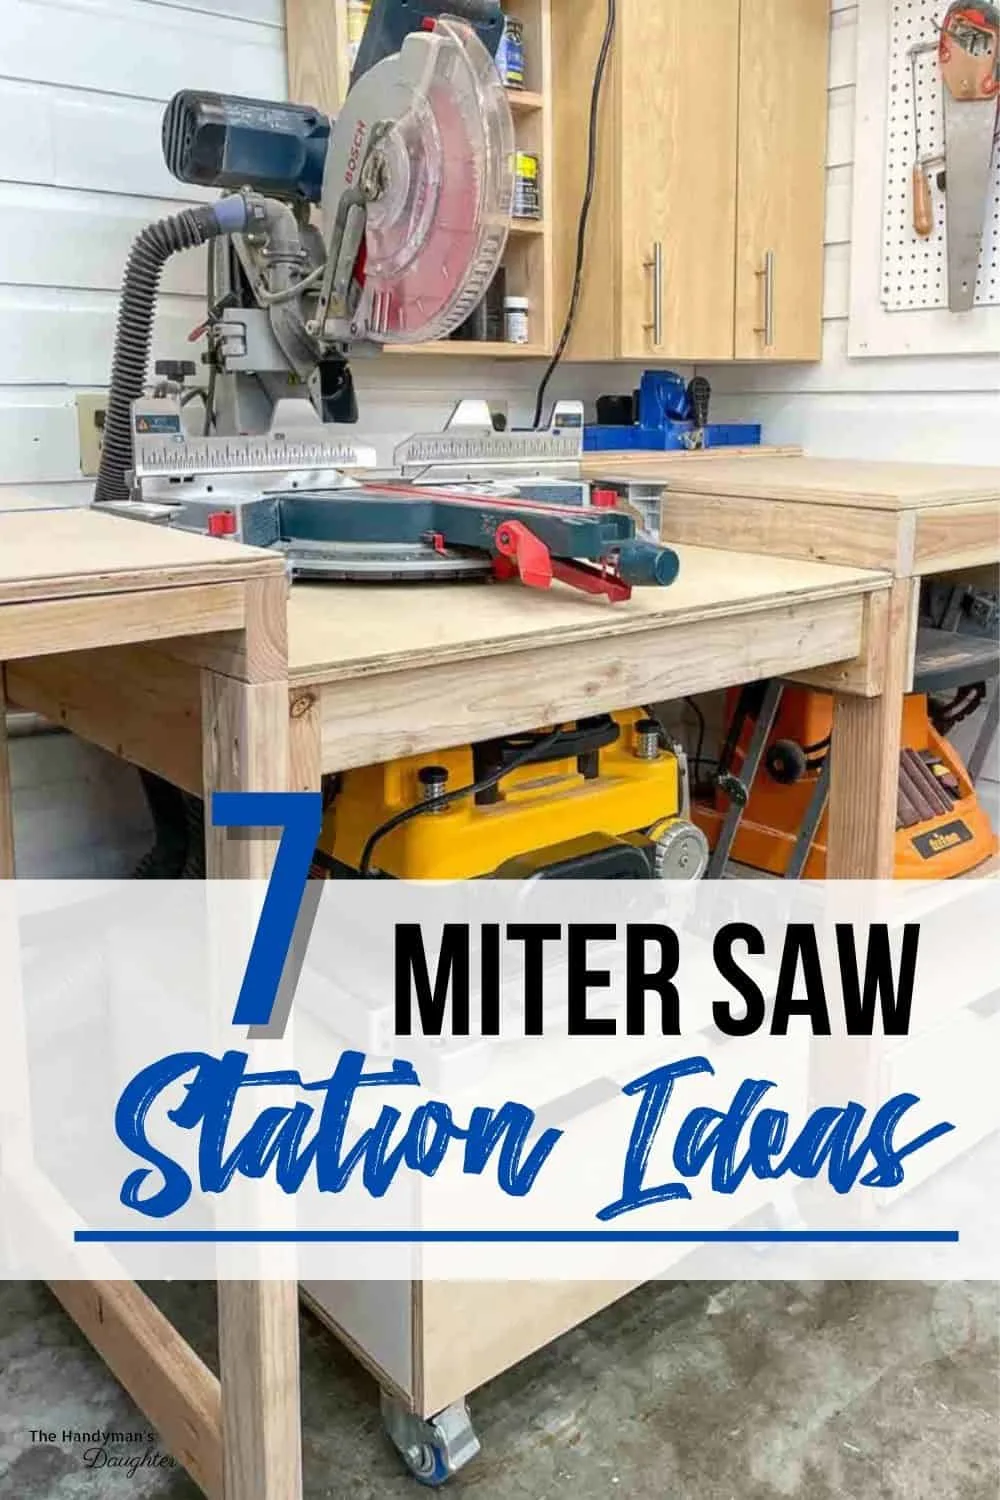 https://www.thehandymansdaughter.com/wp-content/uploads/2021/02/miter-saw-stations-The-Handymans-Daughter-Pin-1.jpg.webp